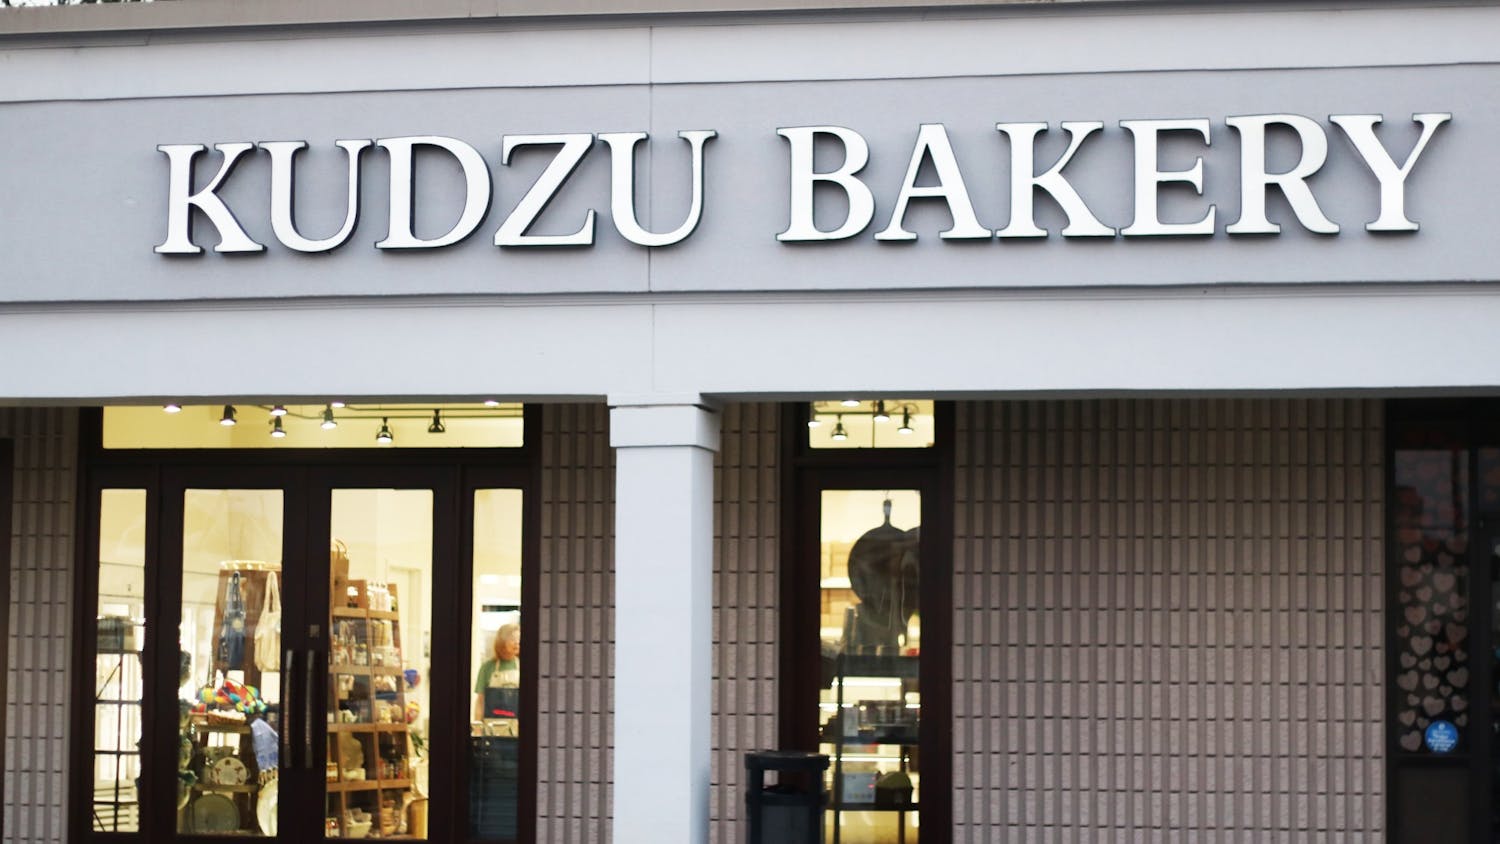 Kudzu Bakery is a small bakery and market chain within South Carolina. The bakery makes a variety of items ranging from breakfast items, desserts and breads.